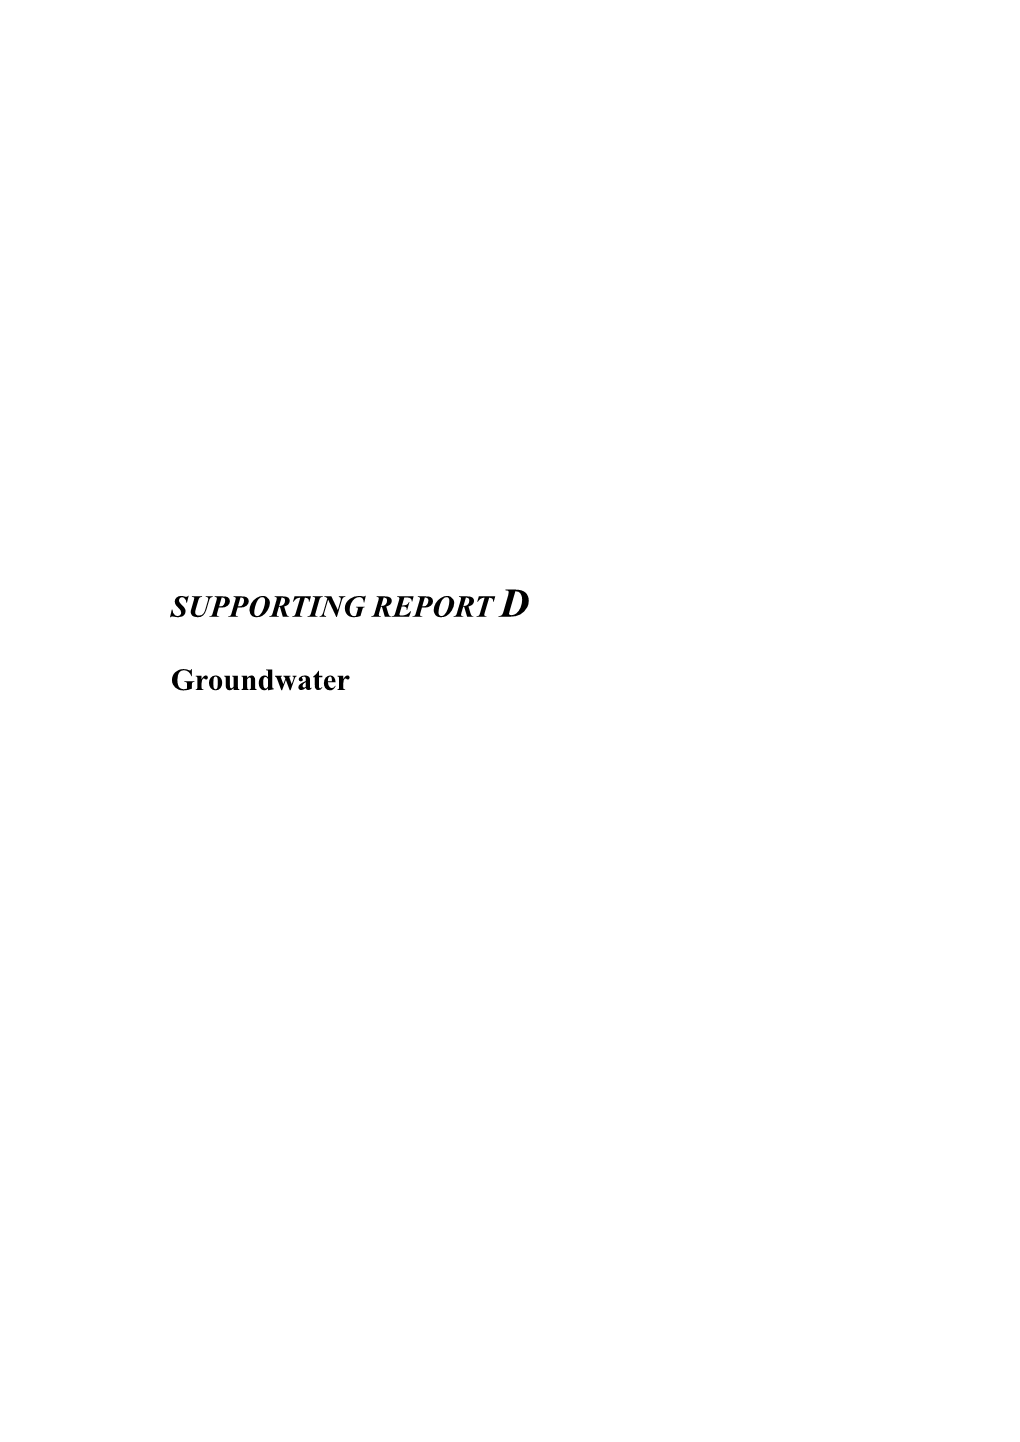 SUPPORTING REPORT D Groundwater